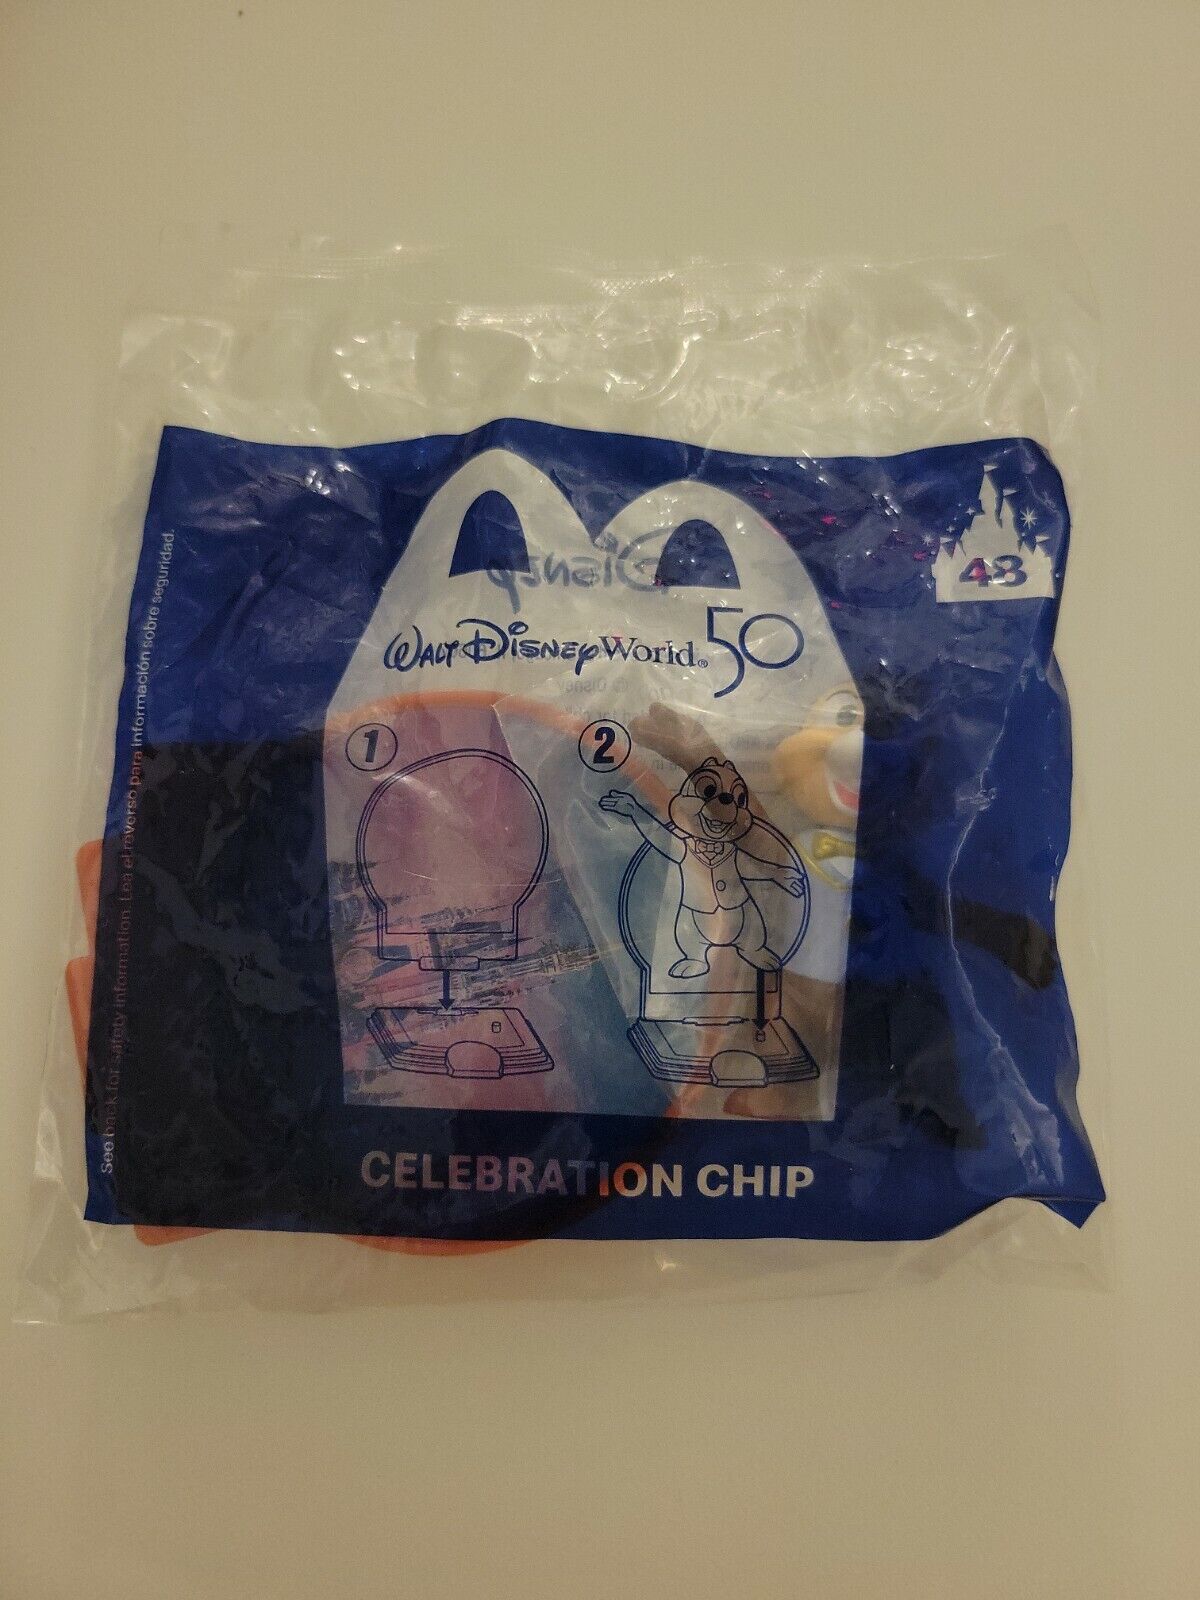 NIP - CELEBRATION CHIP Walt Disney World Free Denver Mall shipping anywhere in the nation Meal Happy #48 McDonald's 50th toy